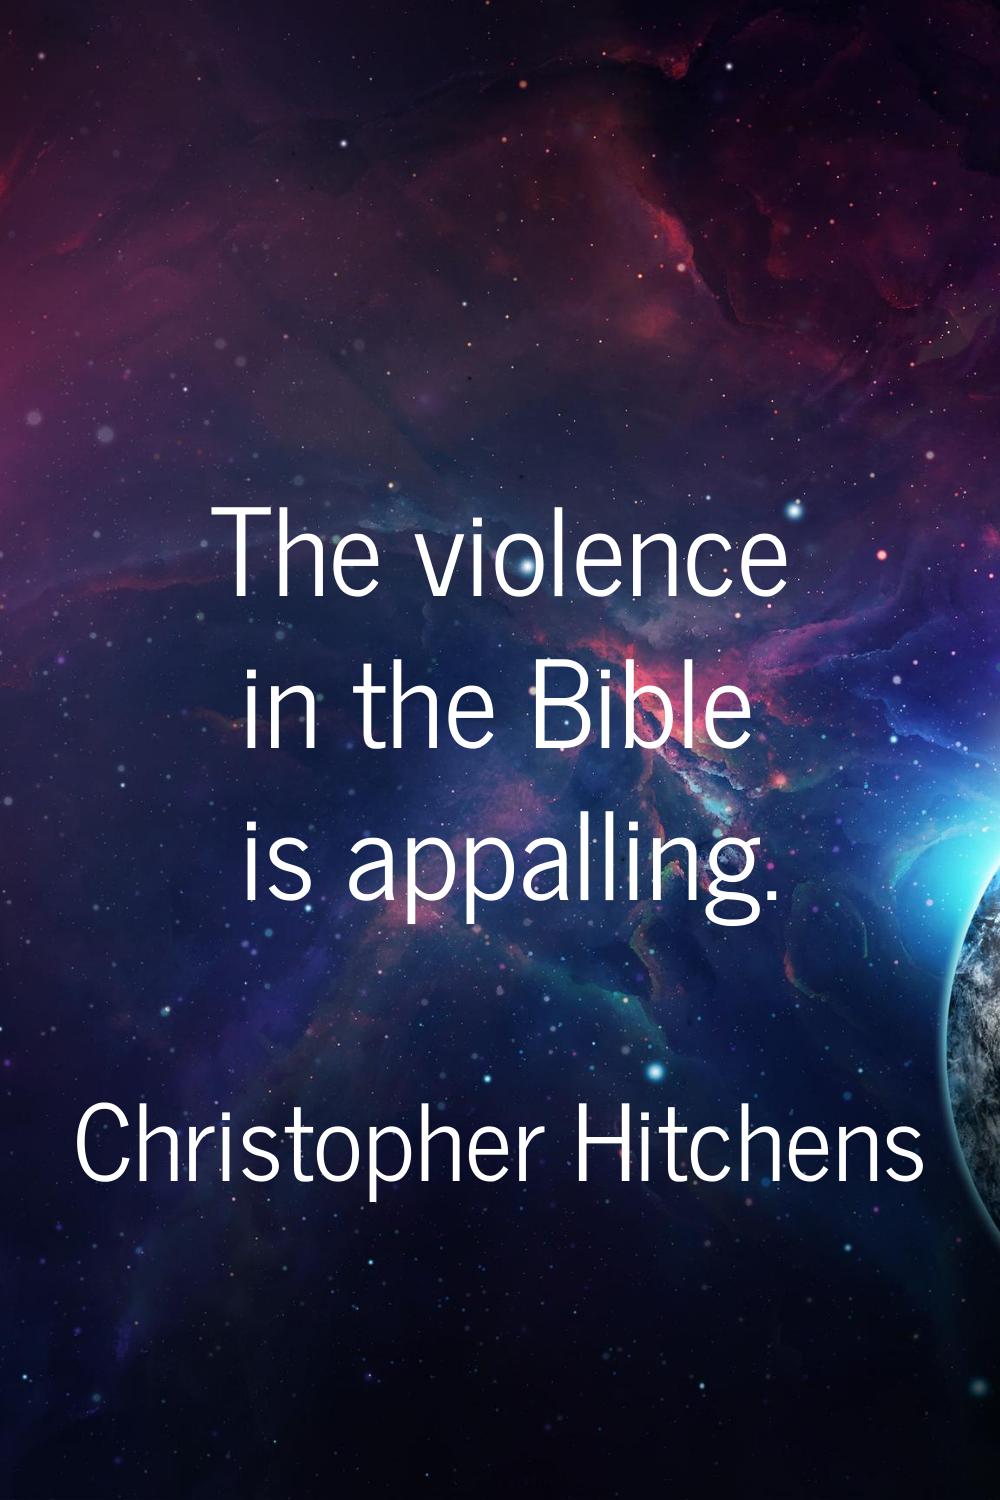 The violence in the Bible is appalling.